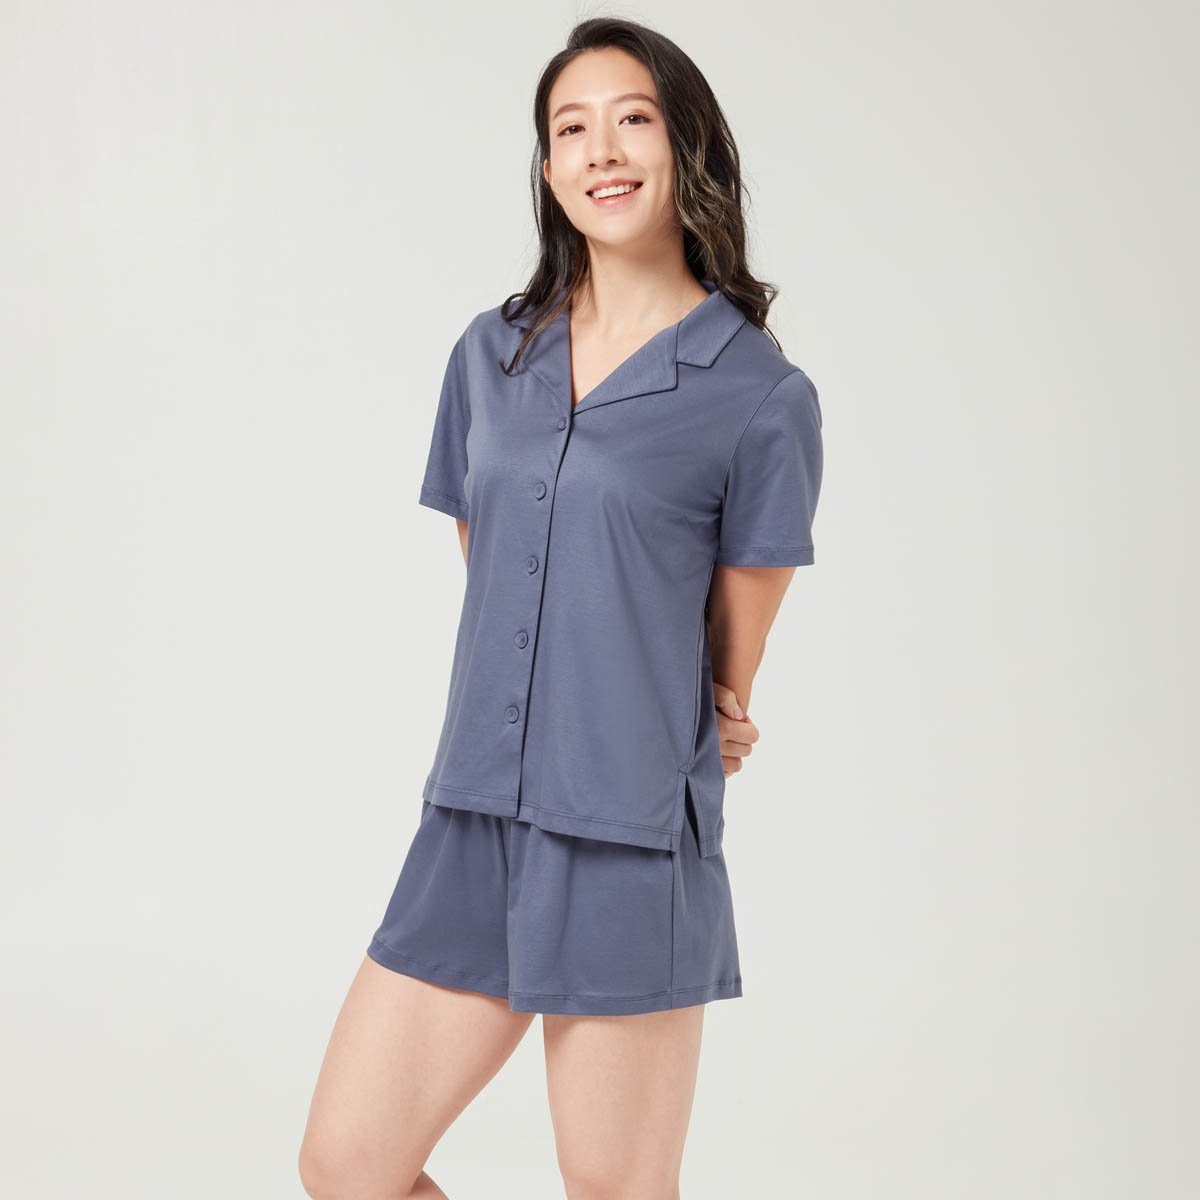 Cotton Silk Pajamas set- Short Sleeve Tops and Shorts Homewear Her Own Words Stonewash S 